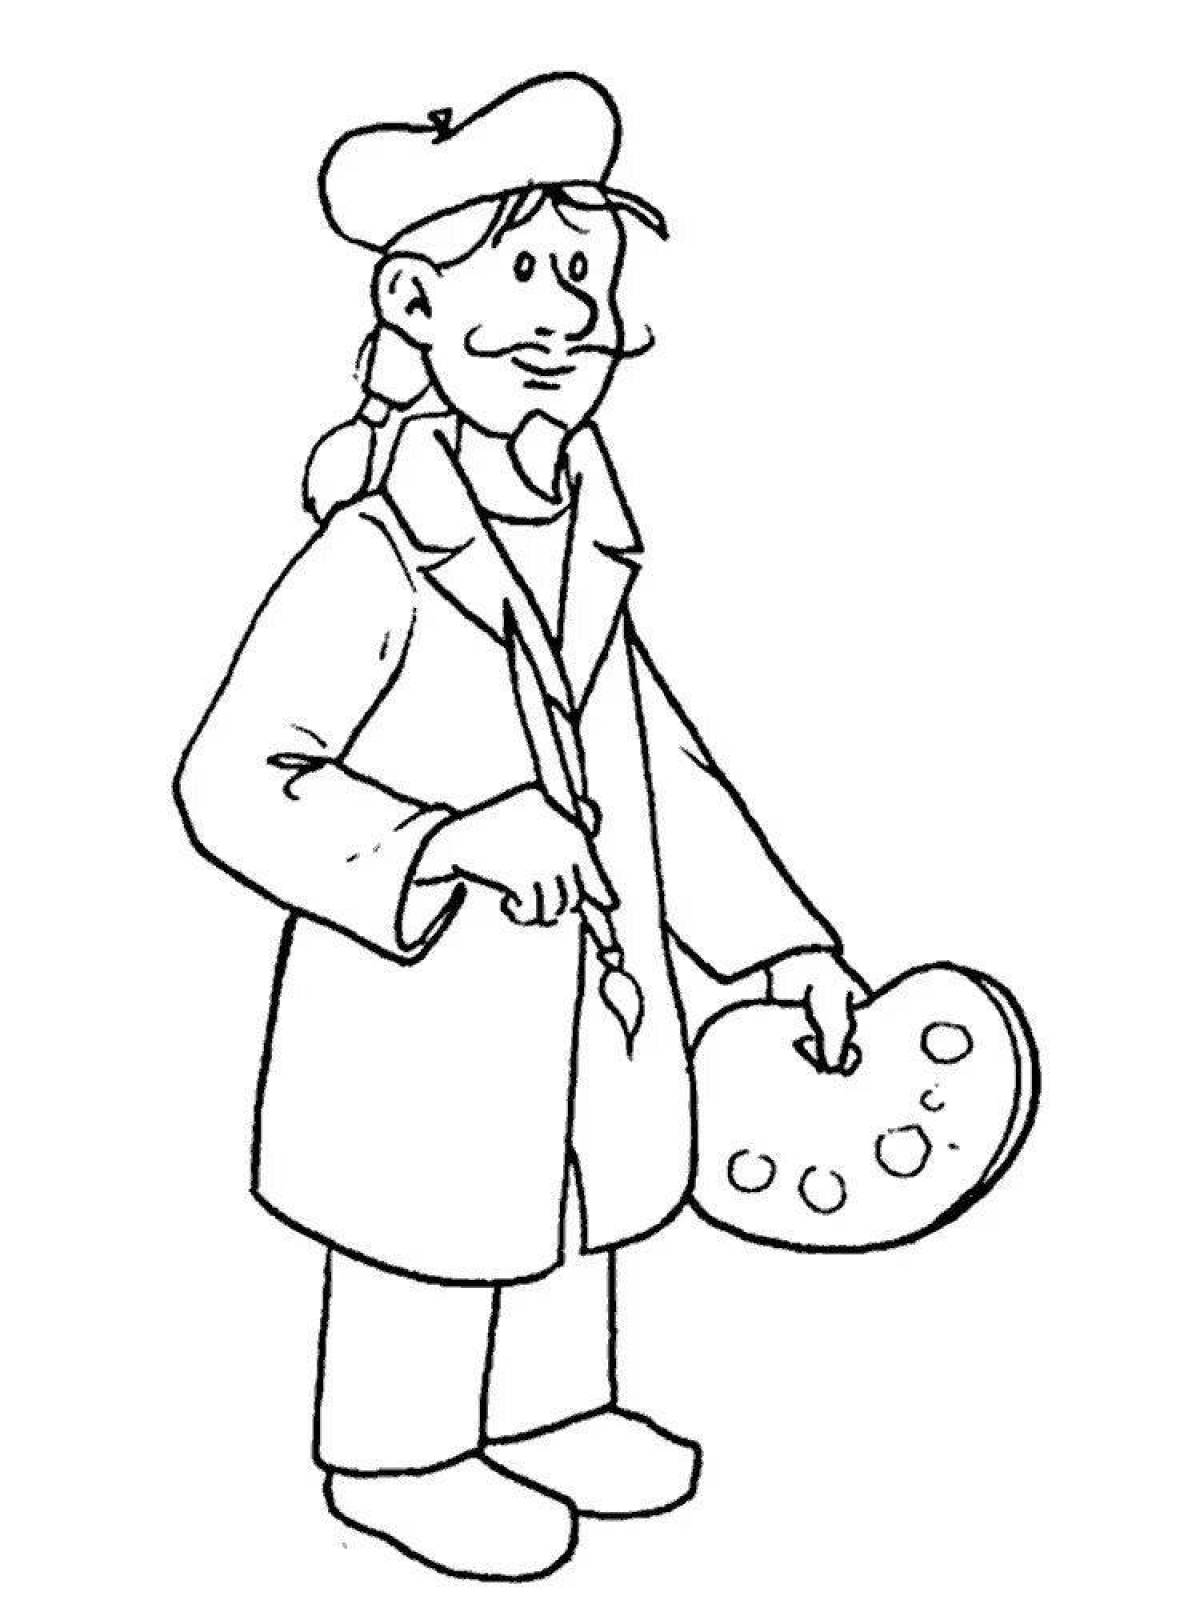 Colorful job coloring pages for discoverers